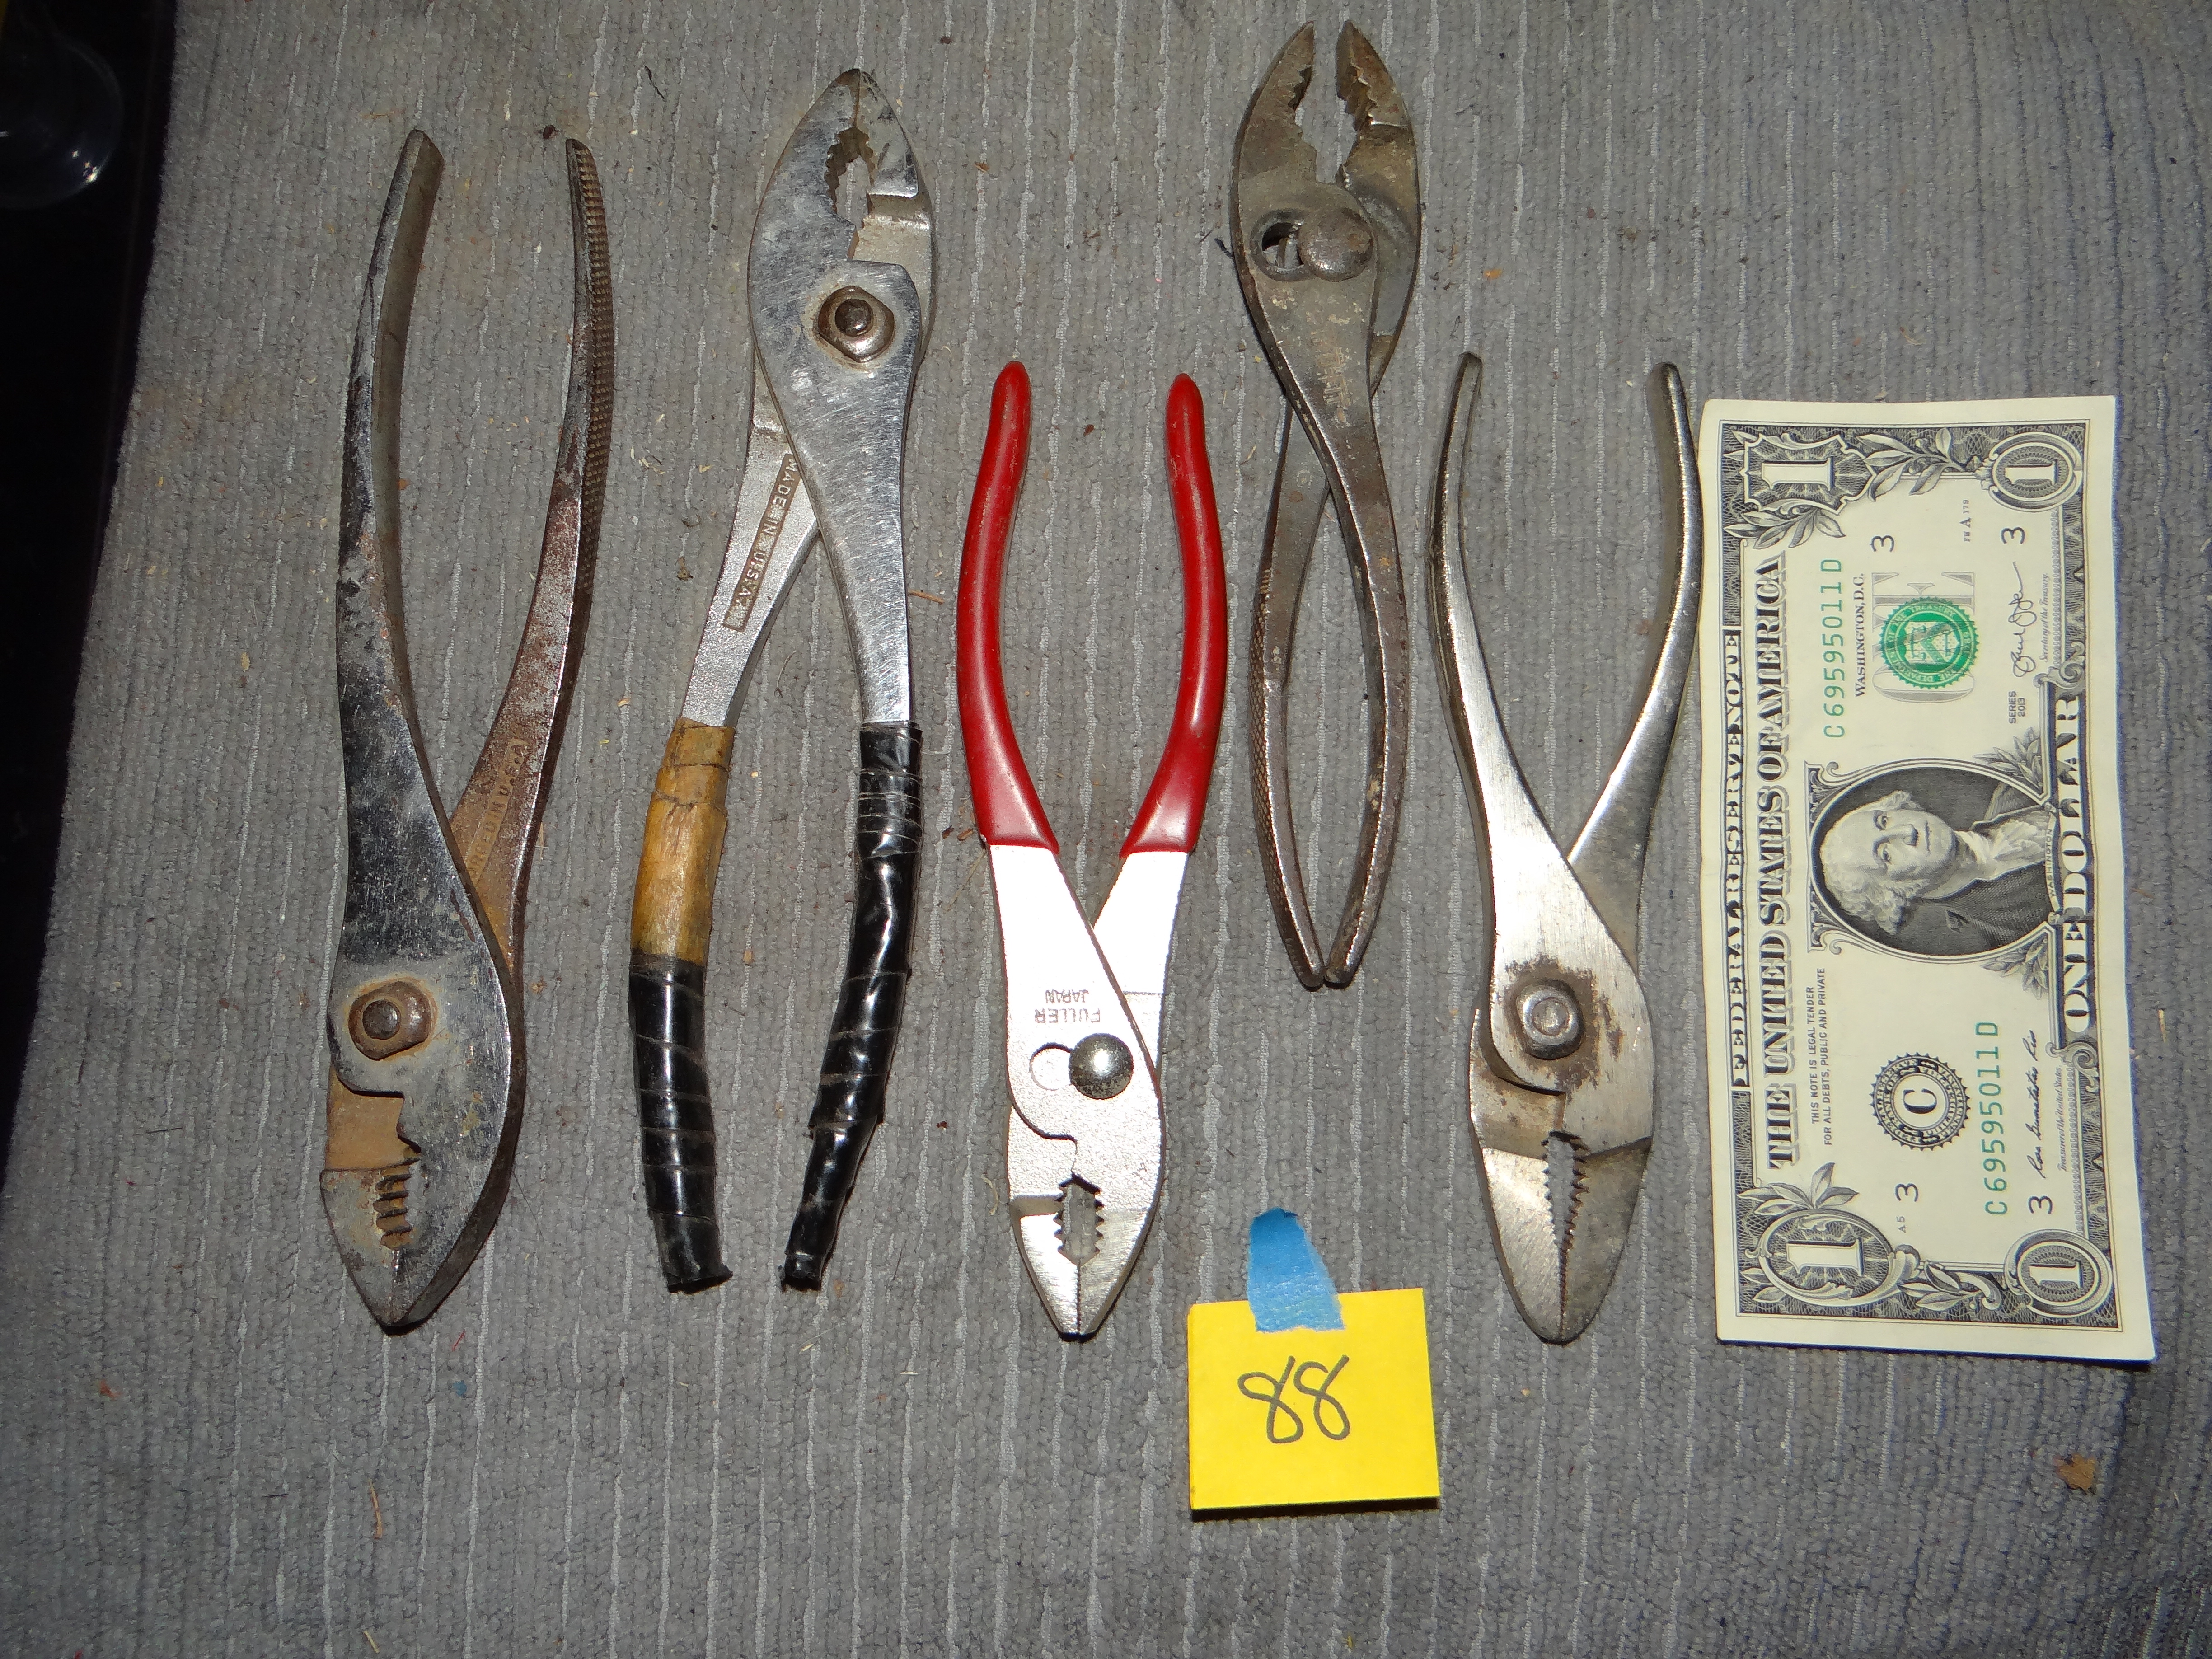 88-Lot of 5 Various Pliers